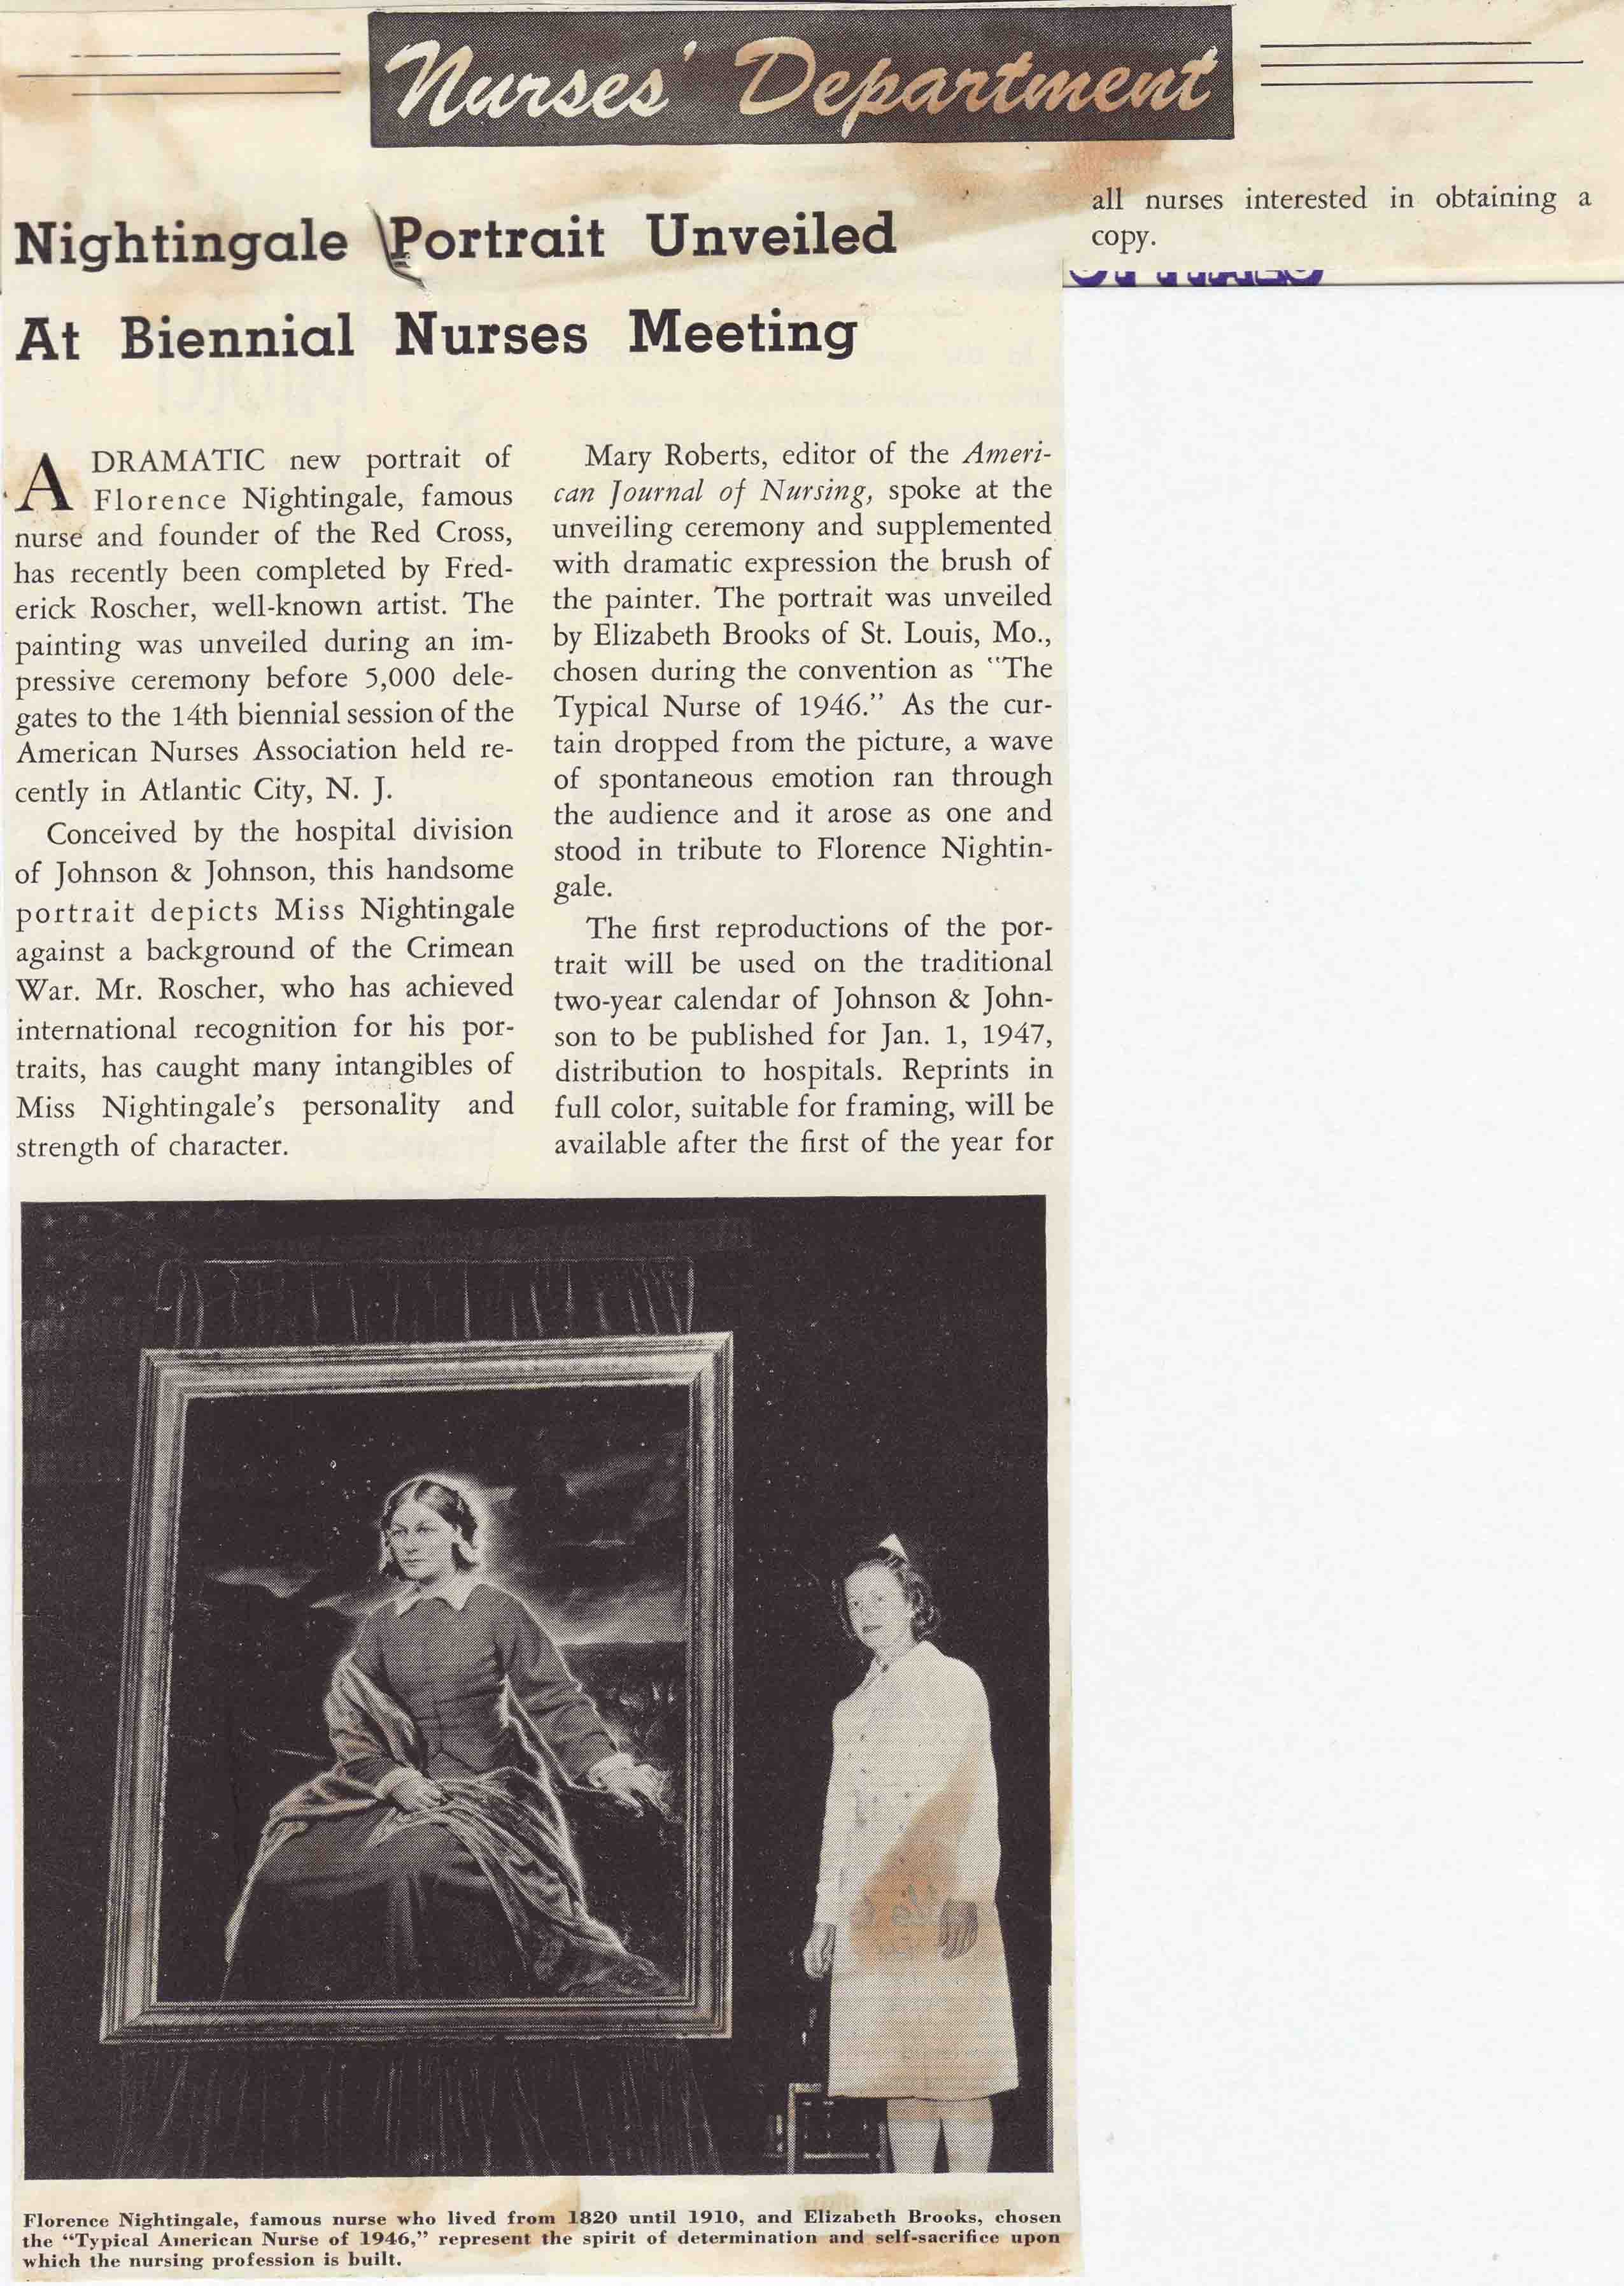 A news clipping from Southern Hospitals Newsletter announces the debut of the painting, November, 1946.  Image courtesy: Johnson & Johnson Archives